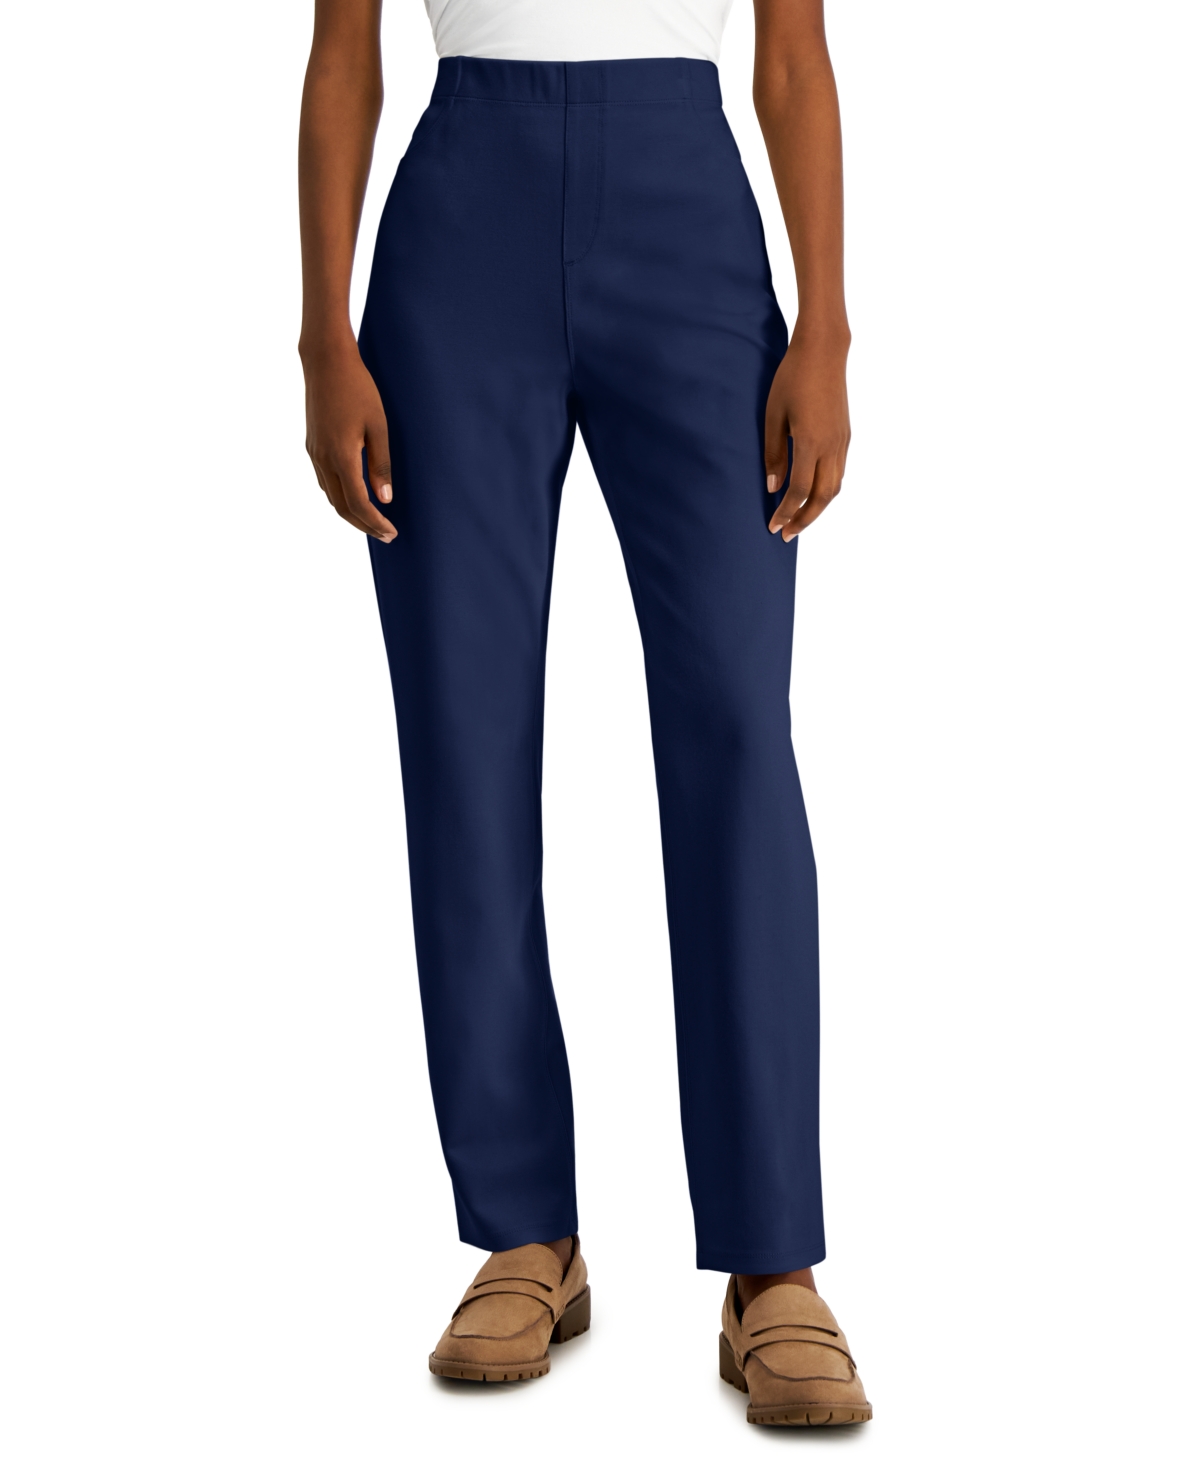 Petite Comfort Pull-On Pants, Created for Macy's - Intrepid Blue